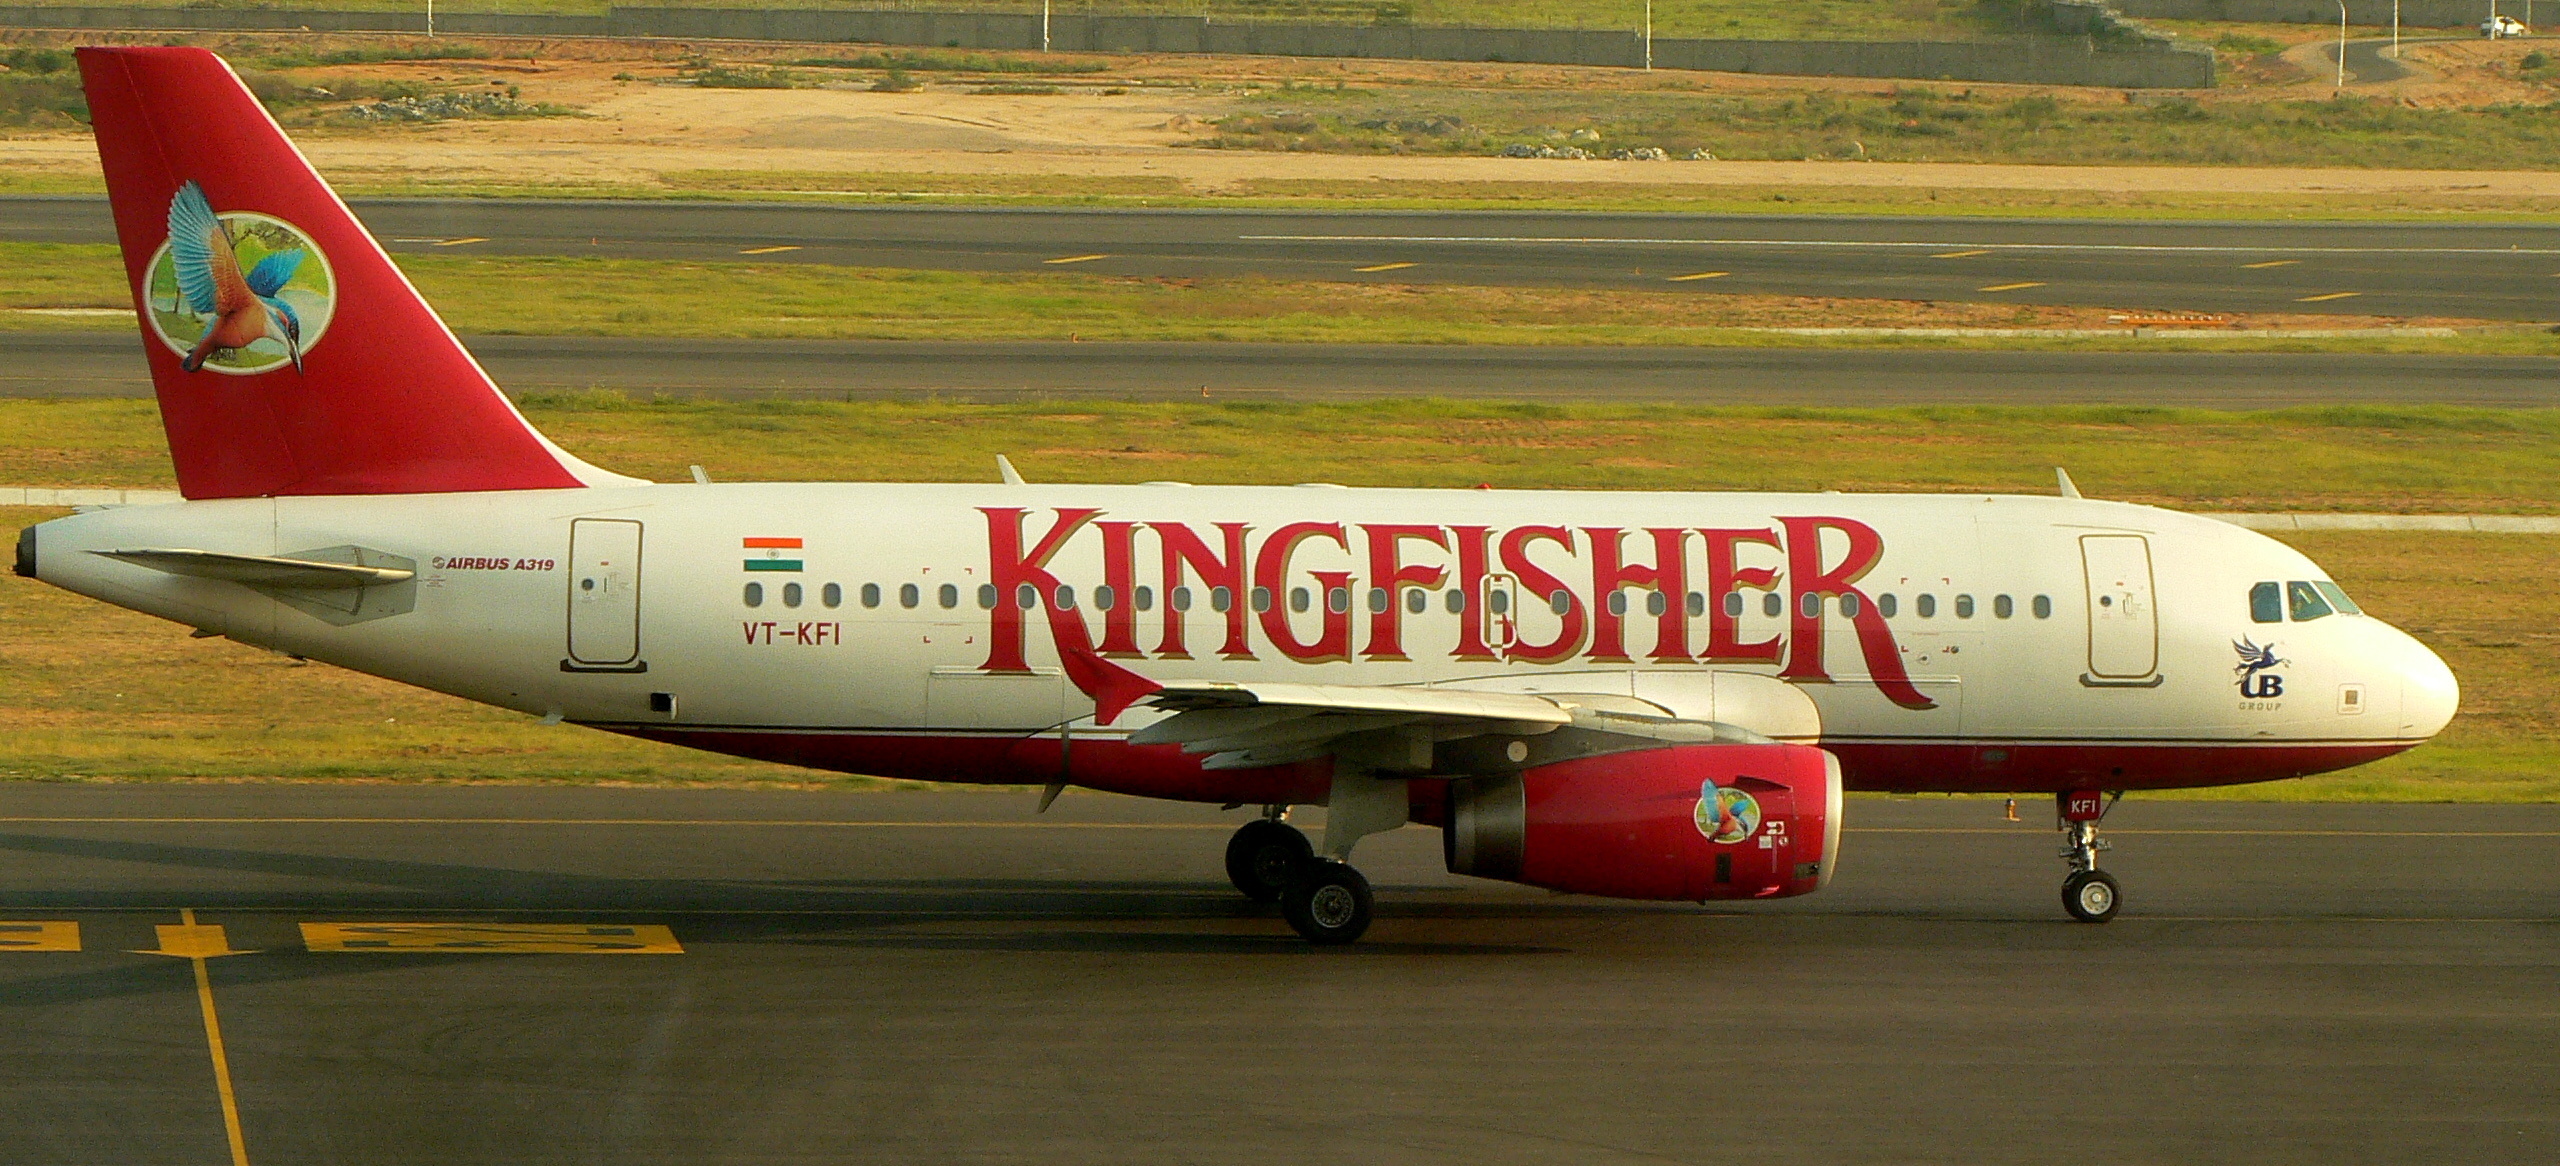 Kingfisher Airlines, Office photos, Campus images, Photo gallery, 2560x1170 Dual Screen Desktop